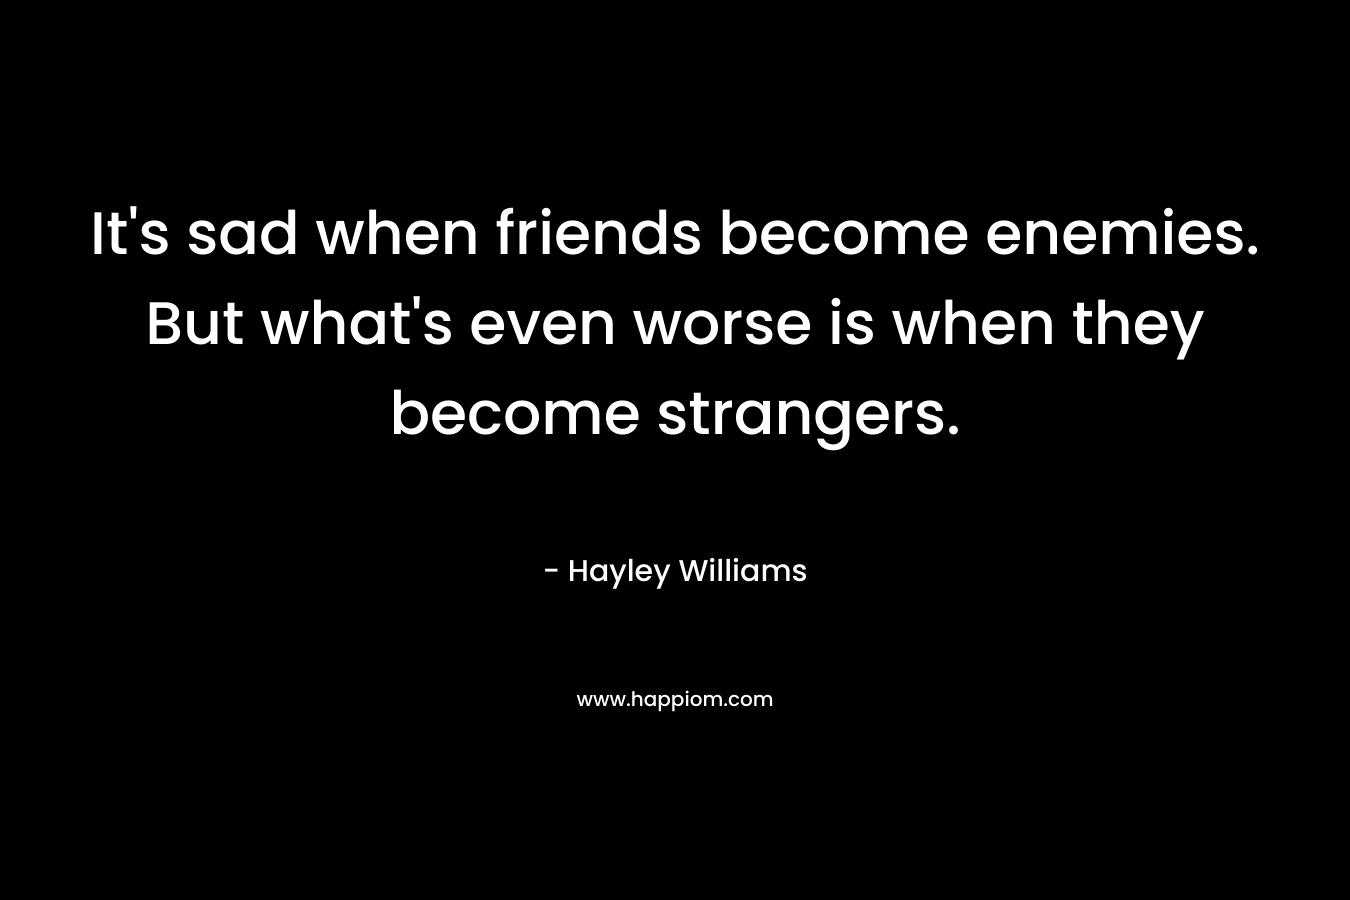 It’s sad when friends become enemies. But what’s even worse is when they become strangers. – Hayley Williams